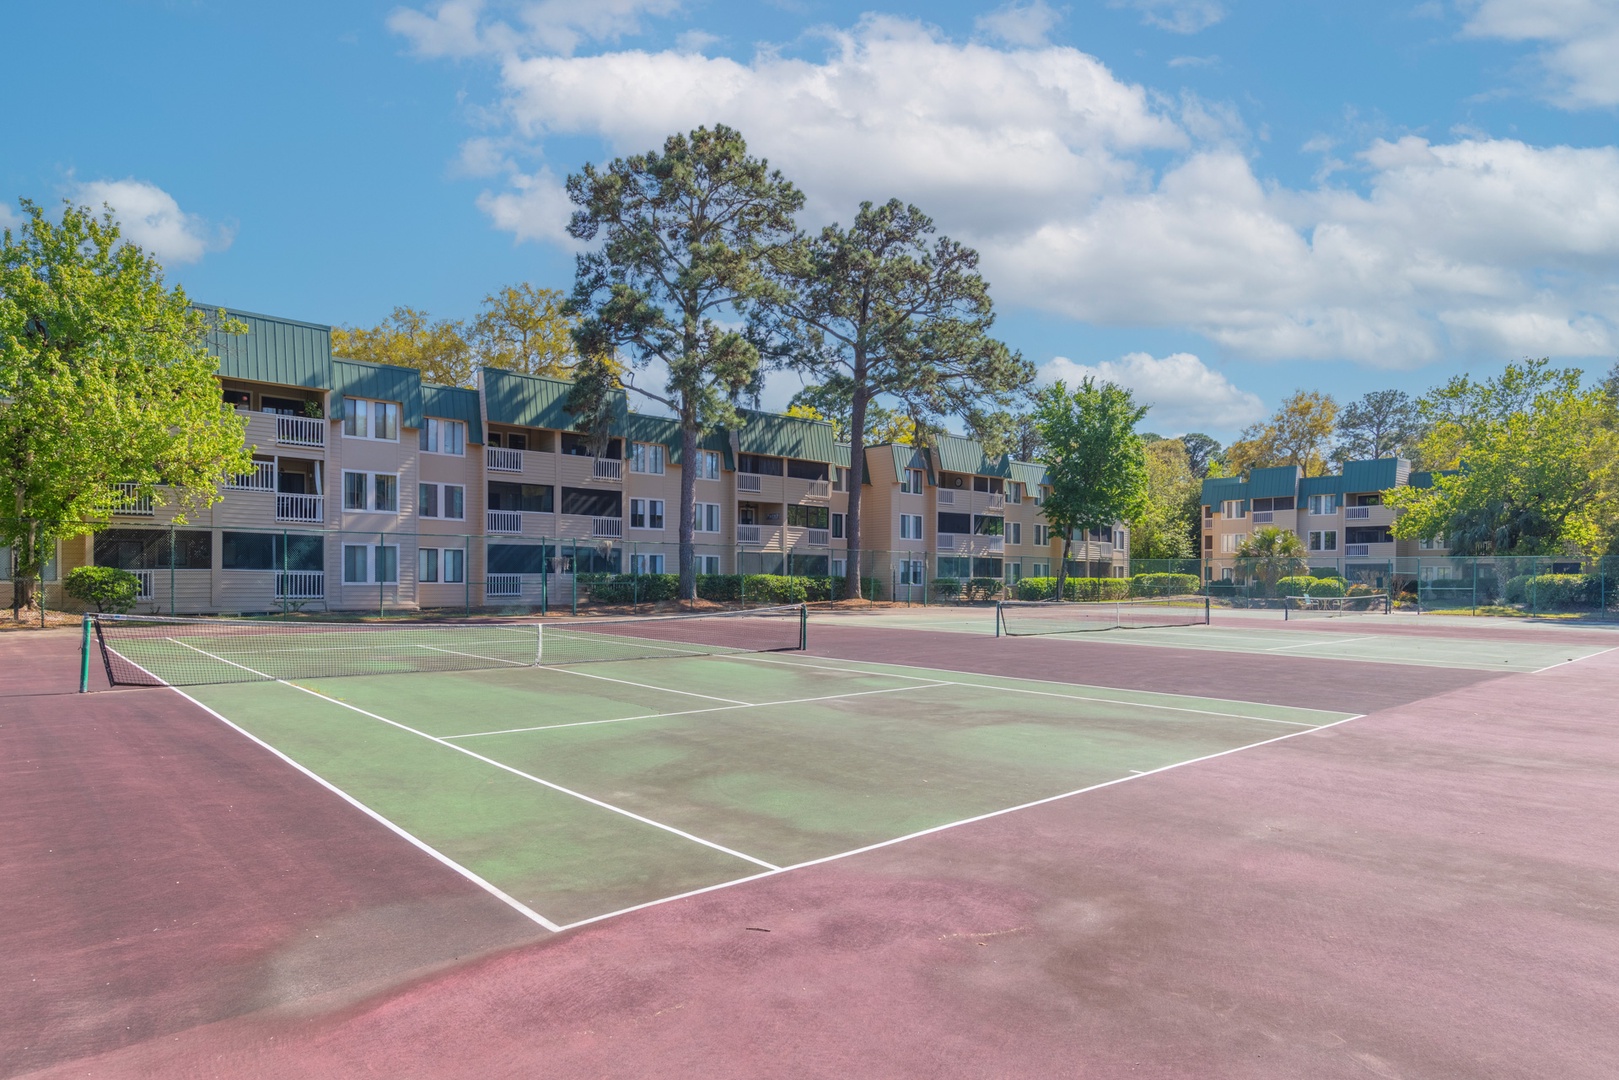 Break out the rackets & unleash your competitive side on the tennis court!